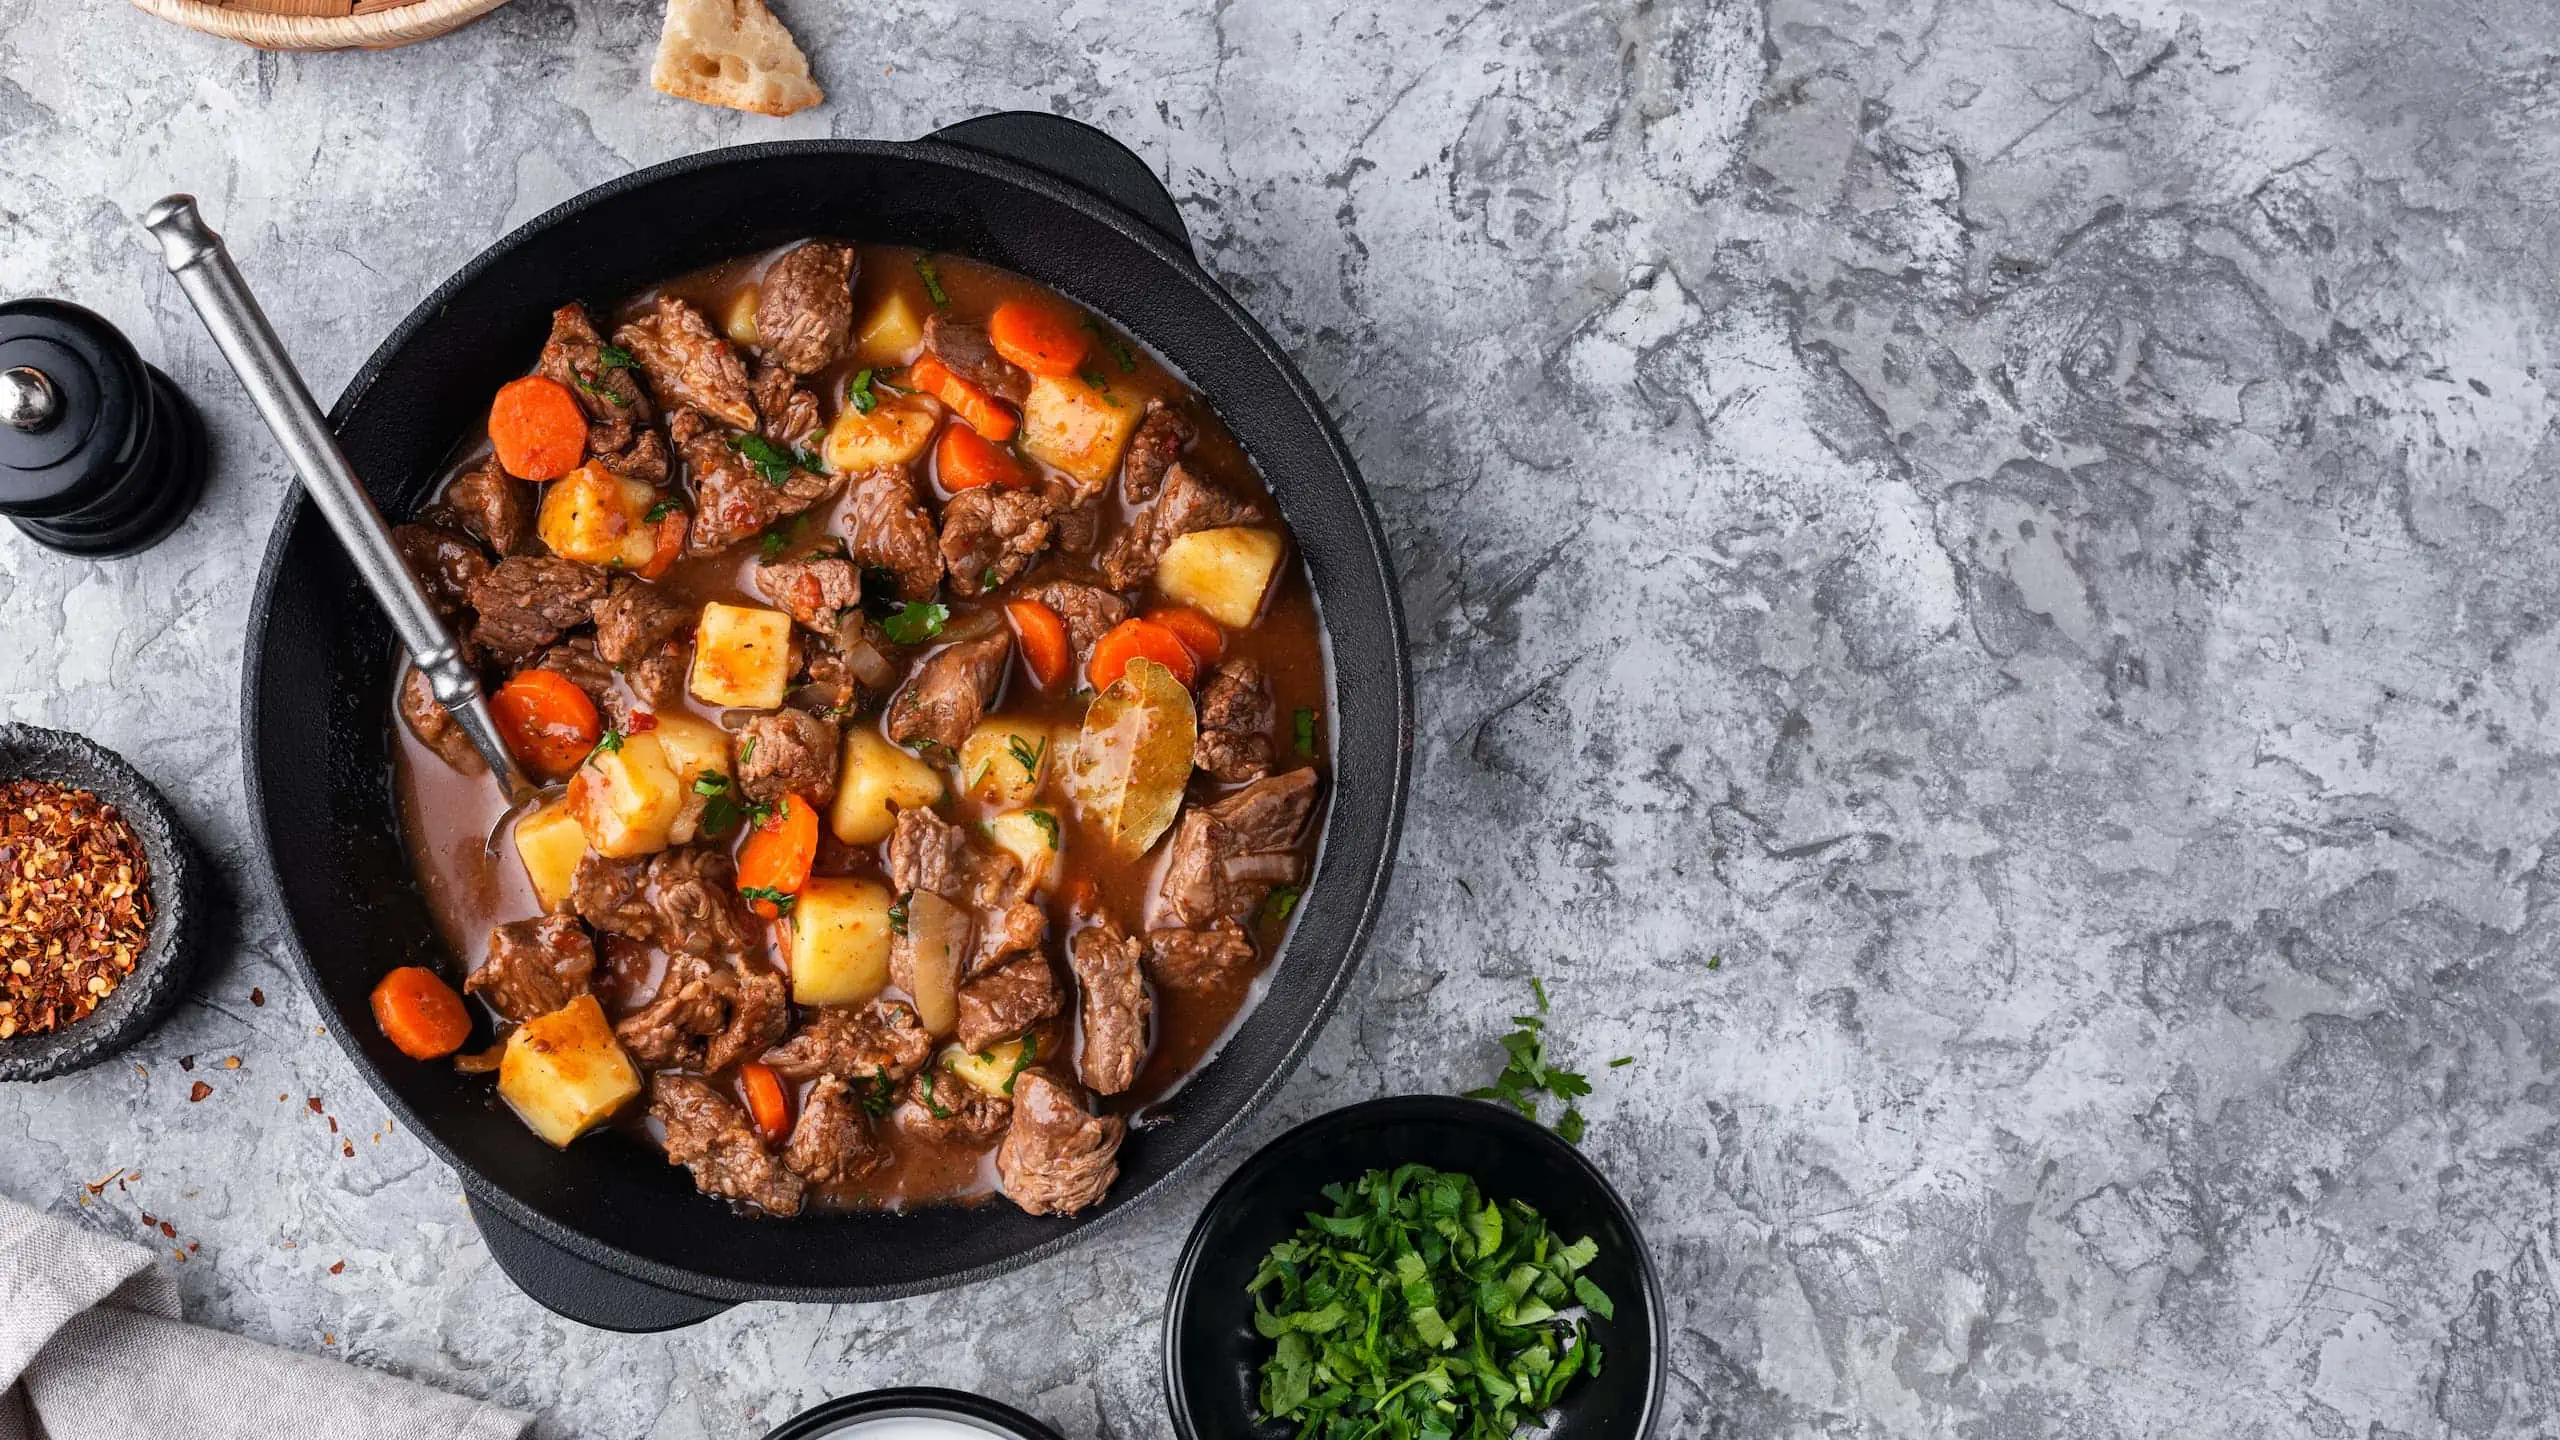 Our version of Dinty Moore beef stew